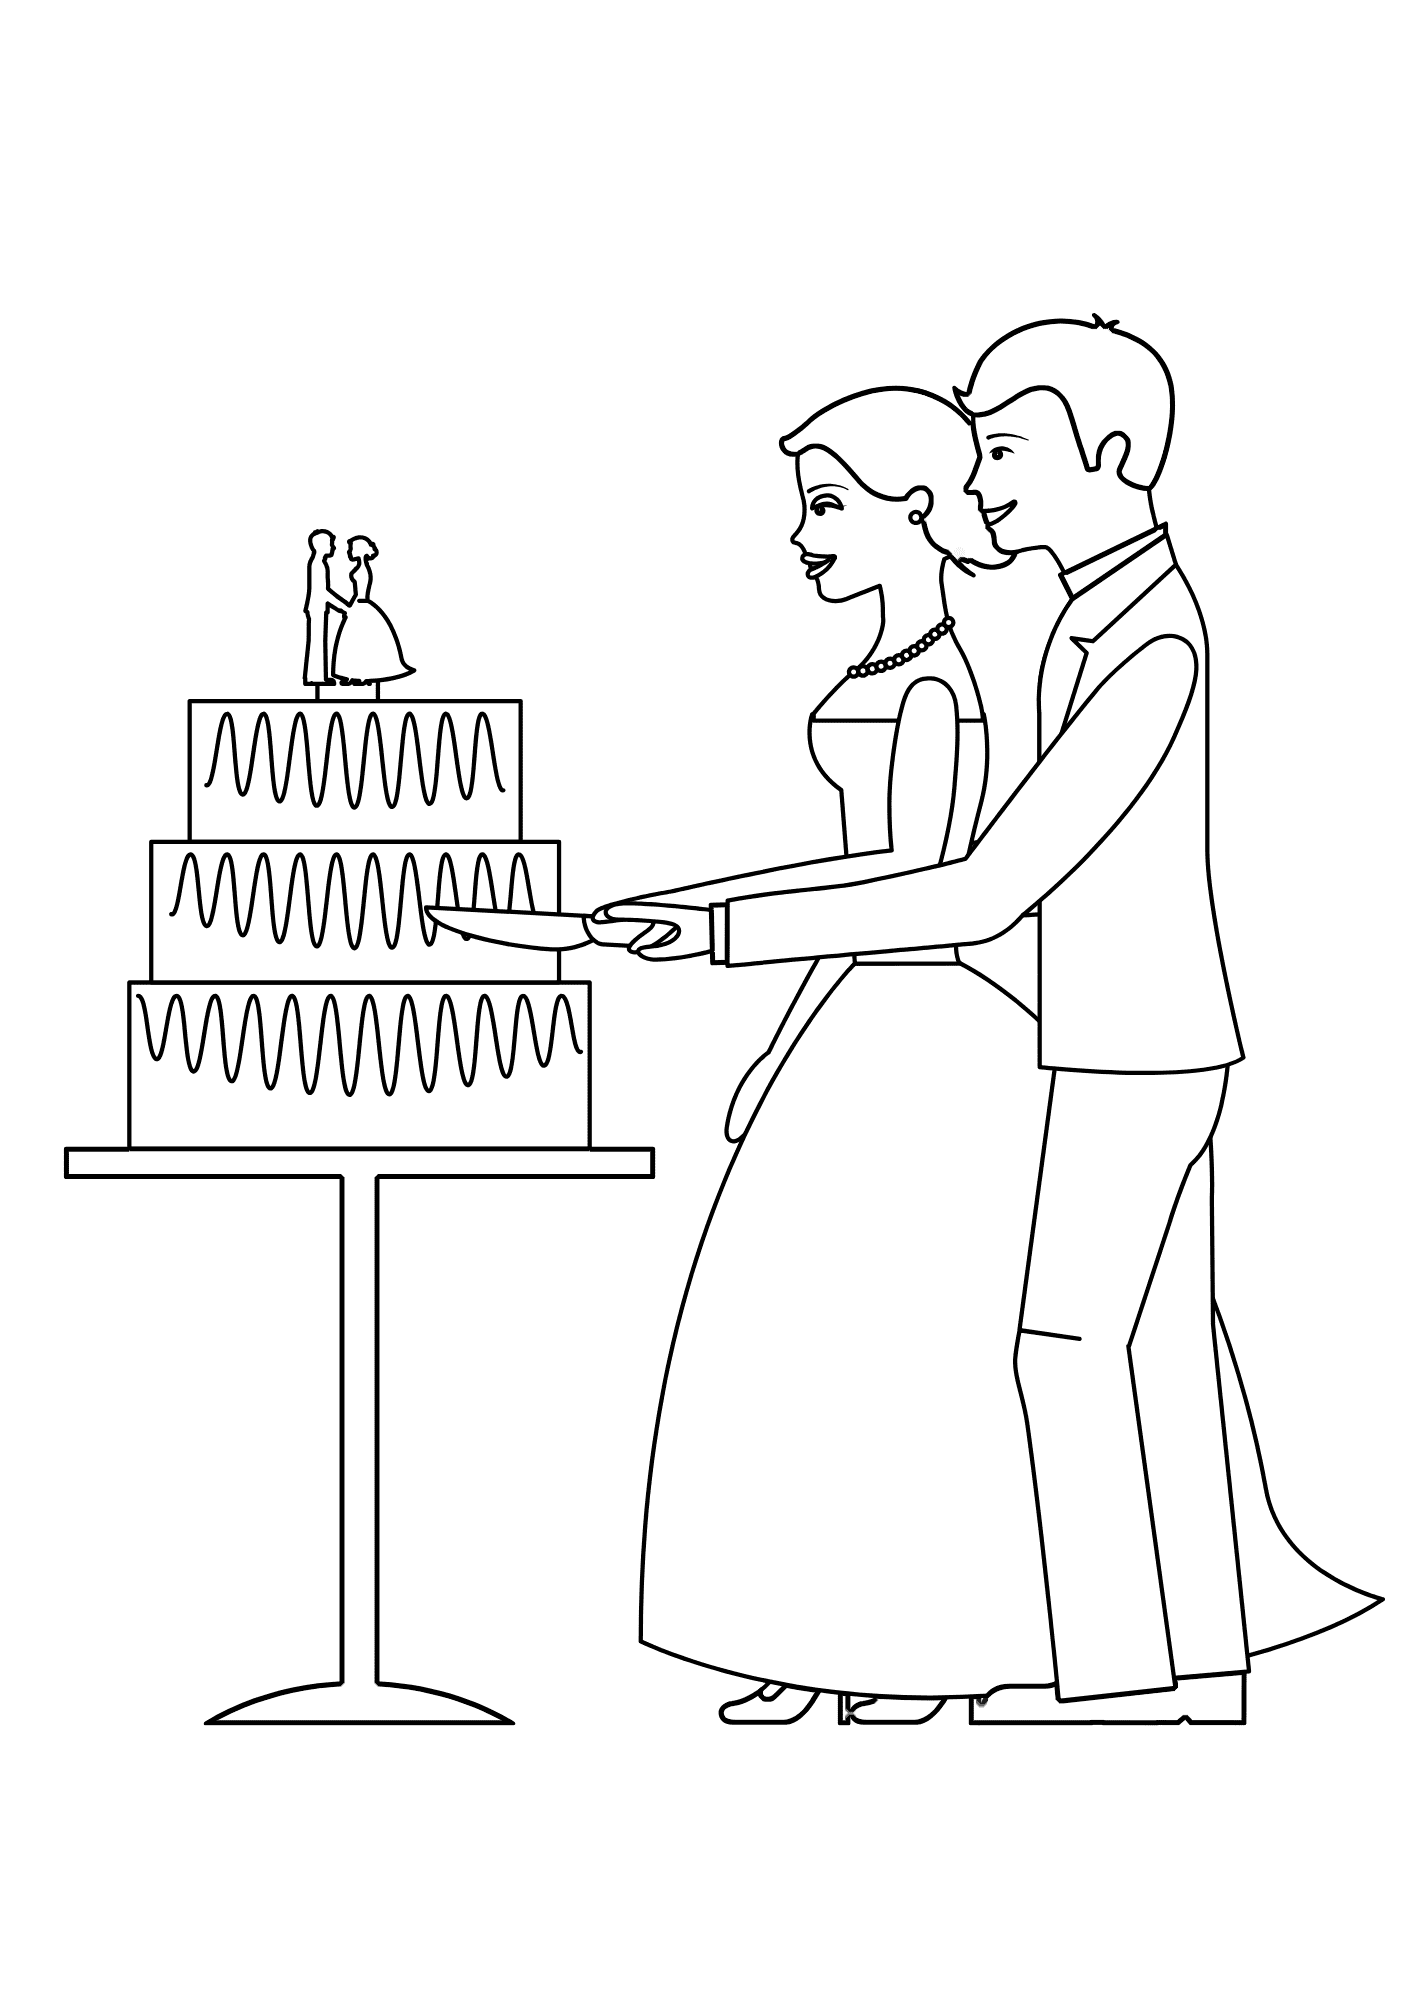 Wedding Cake Painting Coloring Page